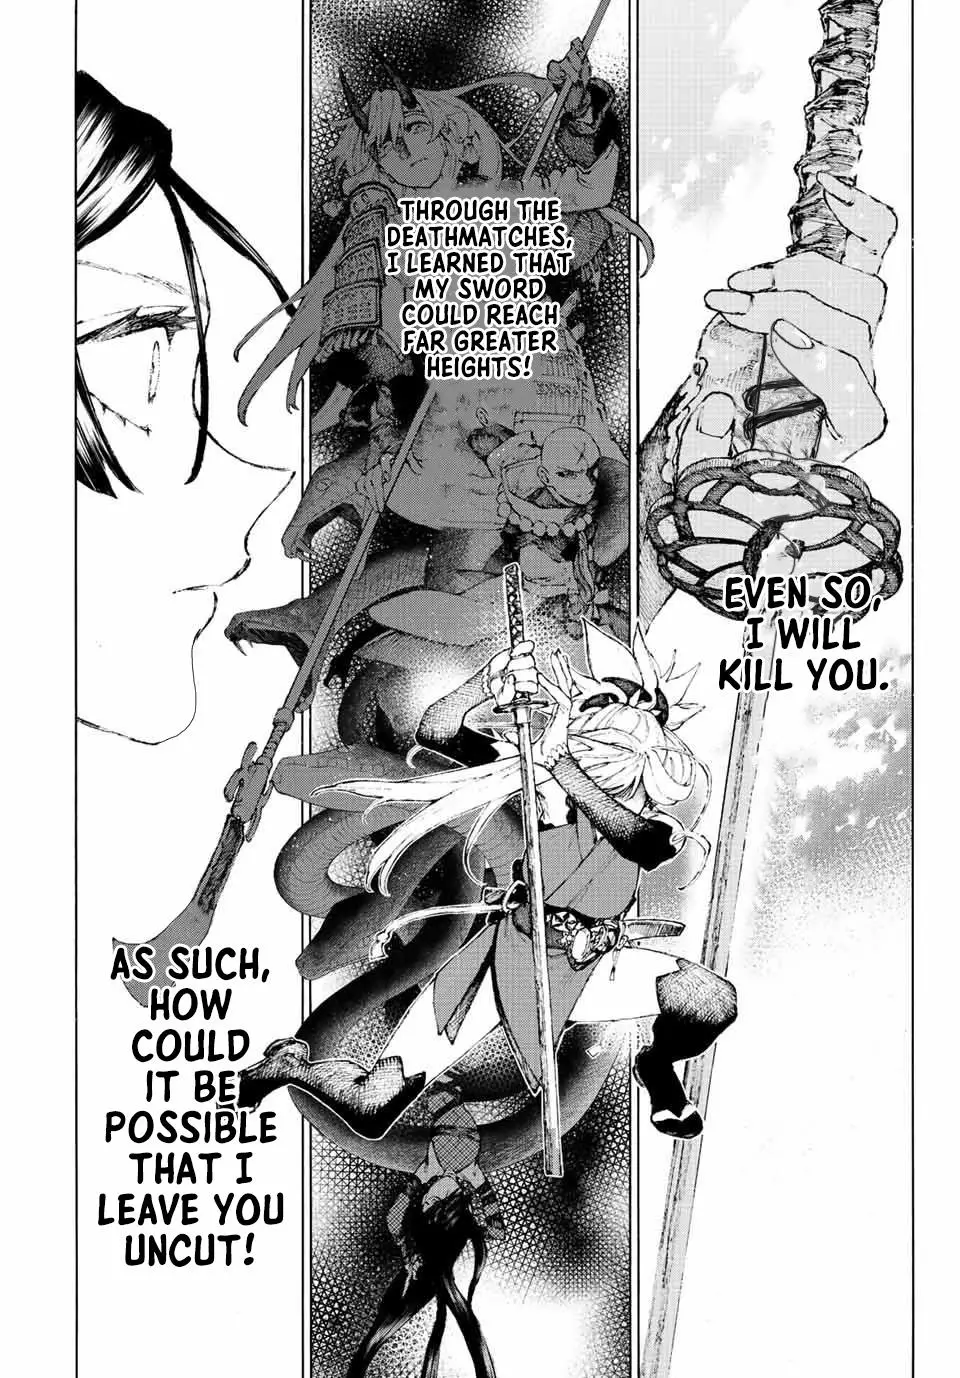 Fate/grand Order -Epic Of Remnant- Pseudo-Singularity Iii: The Stage Of Carnage, Shimousa - Seven Duels Of Swordmasters - 36 page 21-1704127e